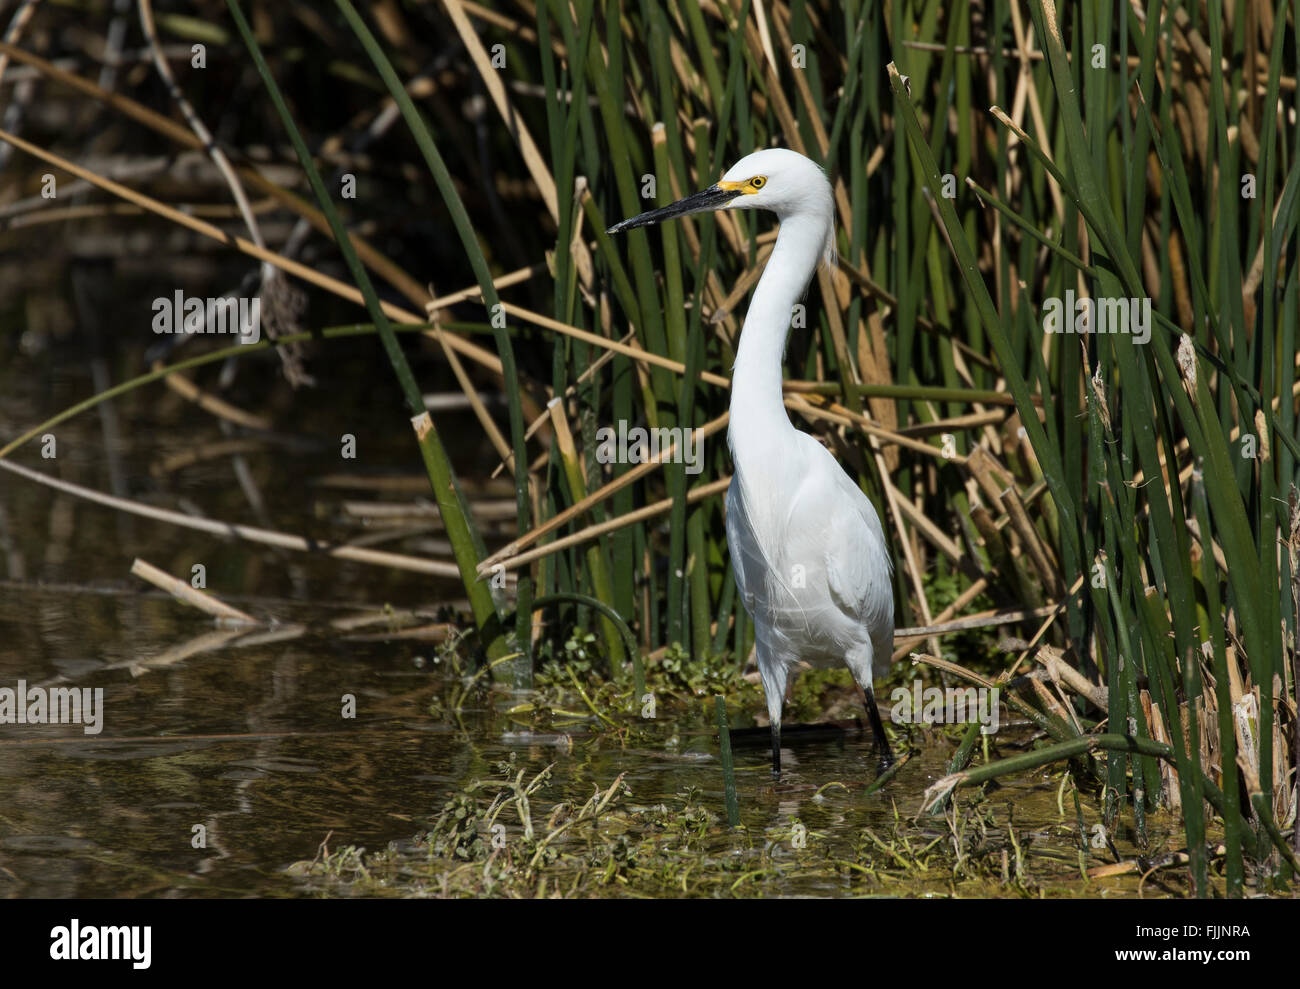 Egret standing in the reeds at the edge of a pond Stock Photo